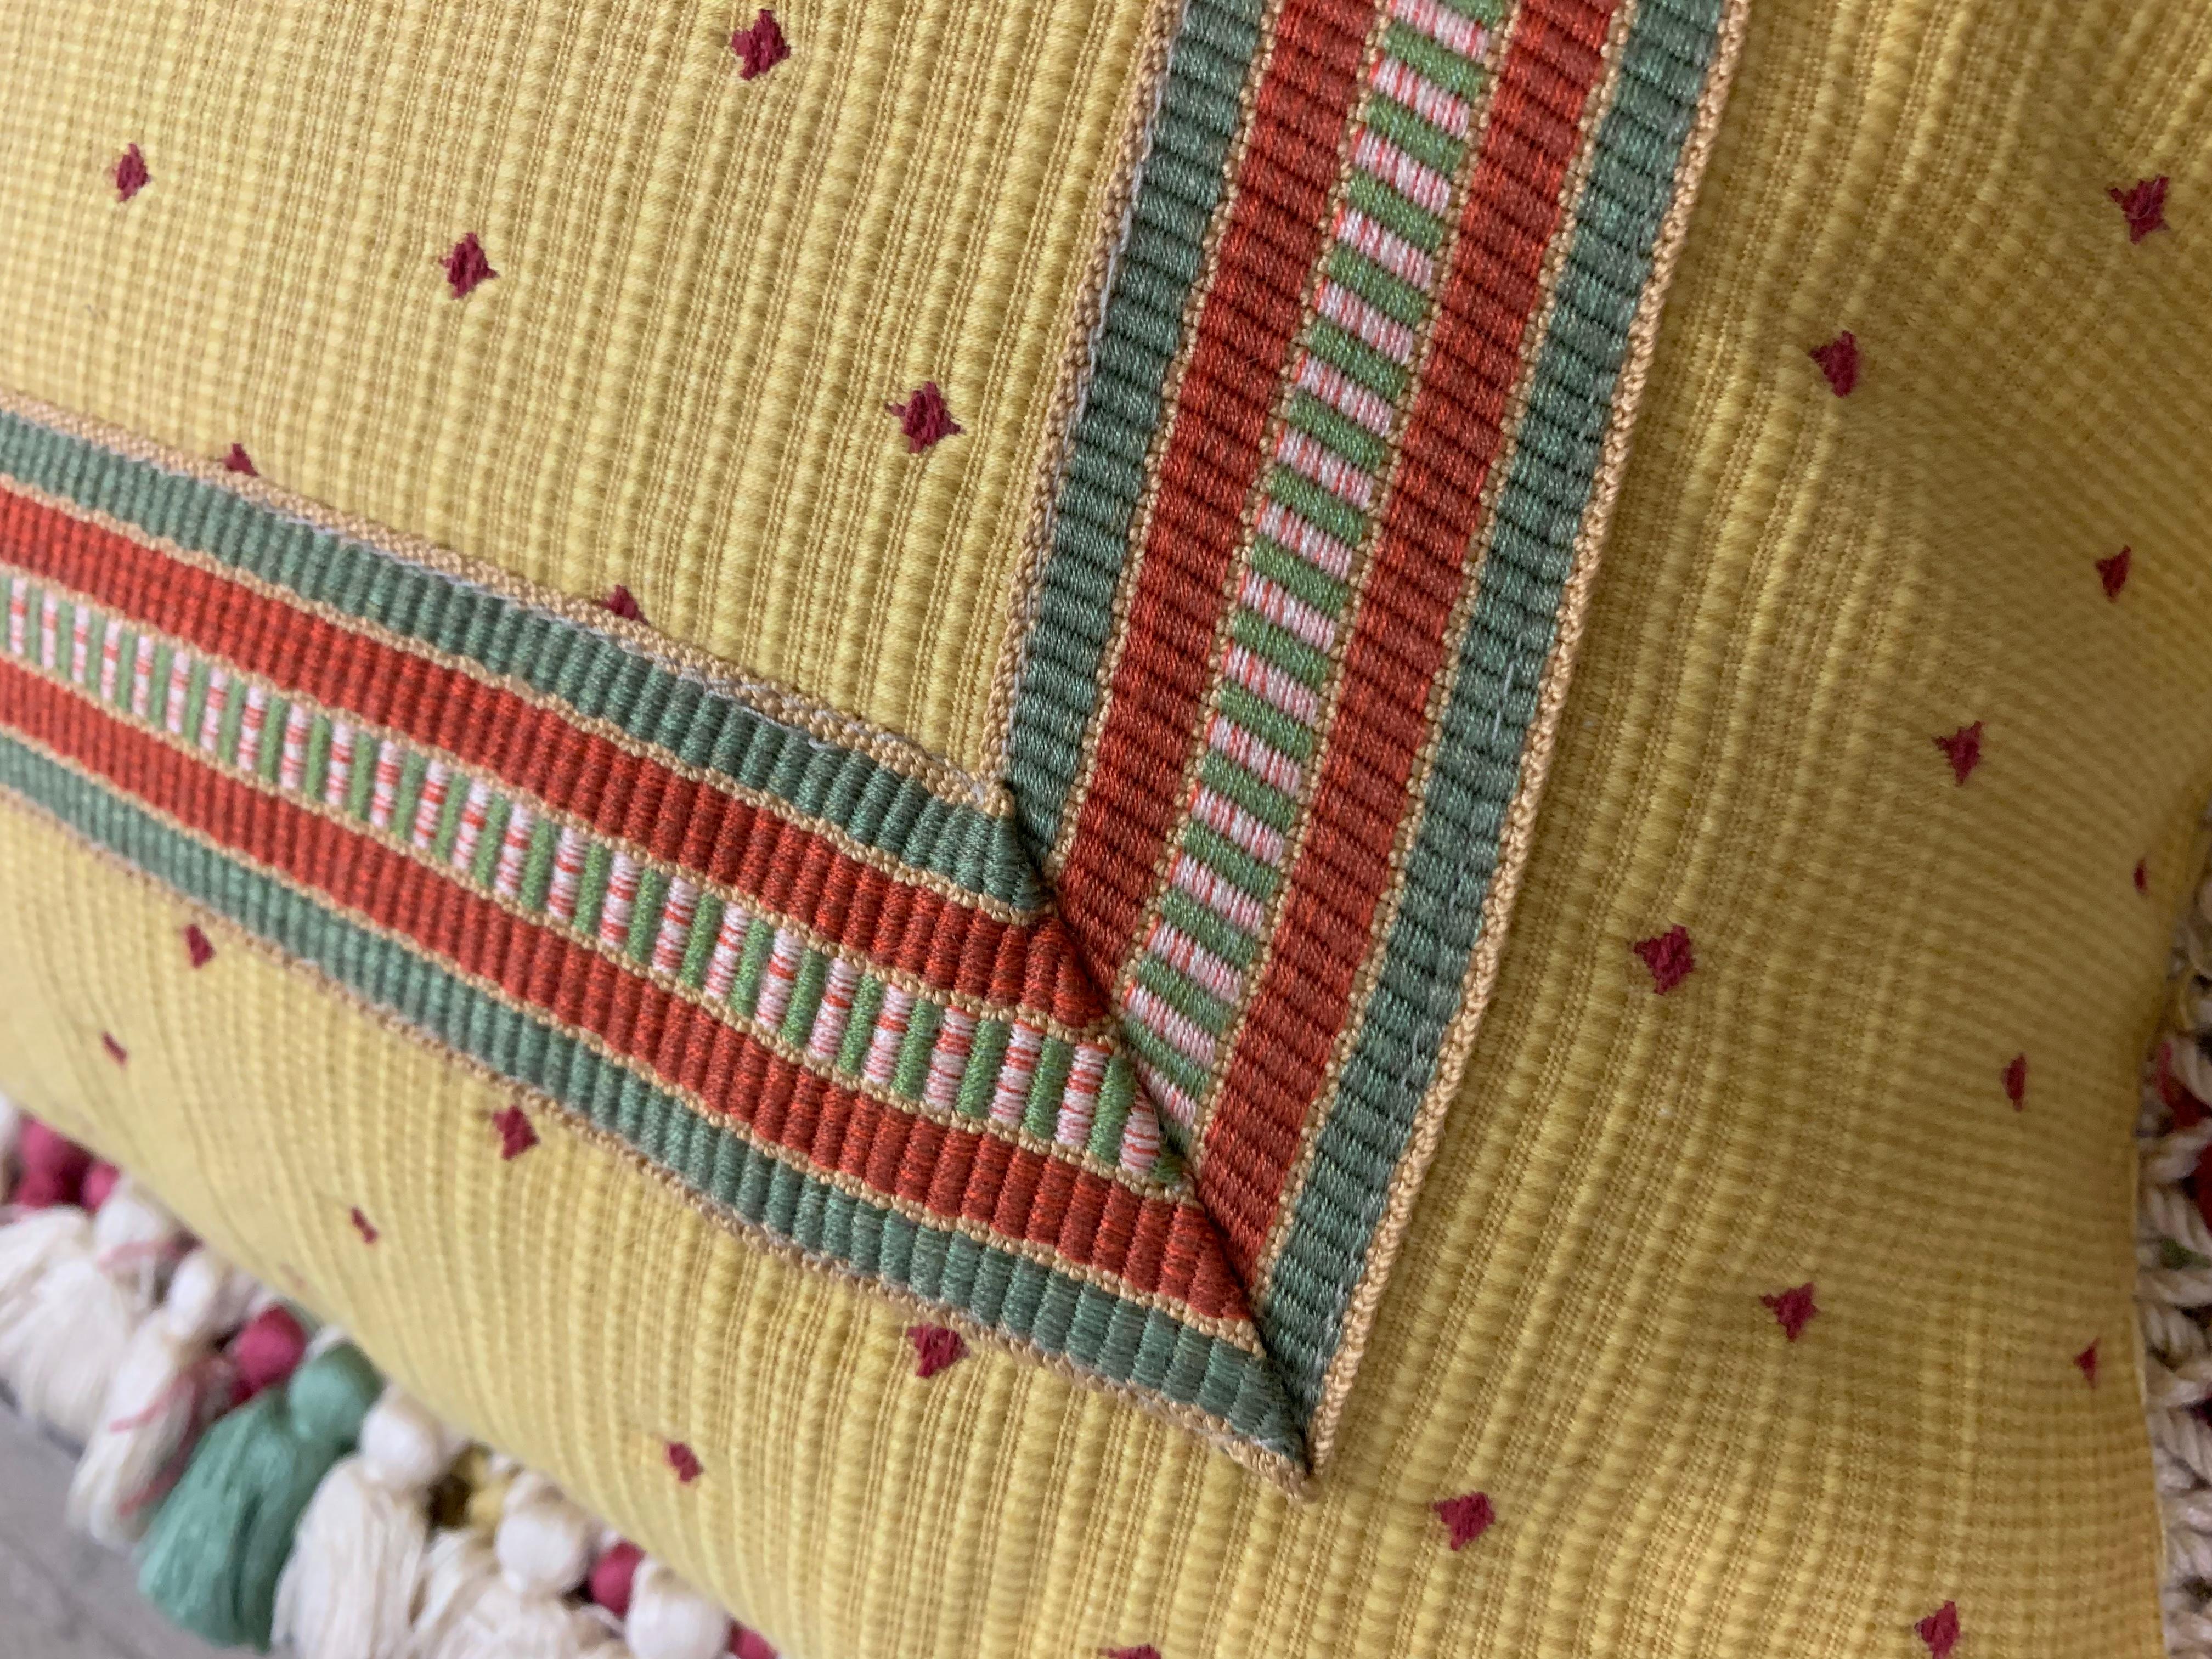 Cotton Antique Handmade Pillow in Green and Gold Tones with Tassel Trim For Sale